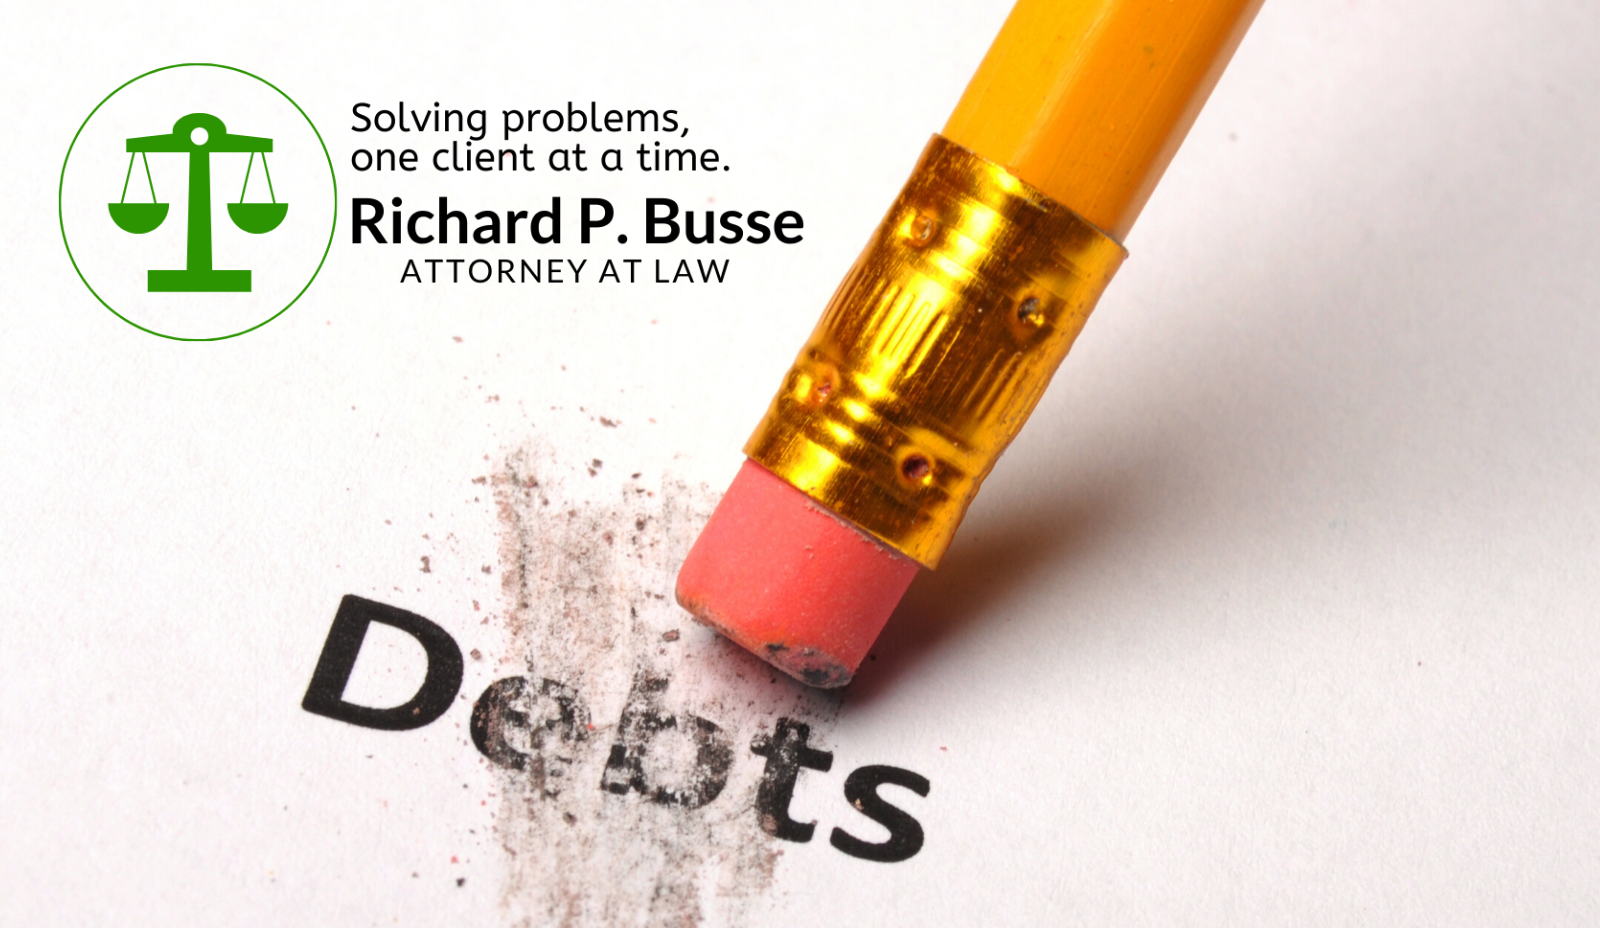 Richard P. Busse, Attorney at Law Photo